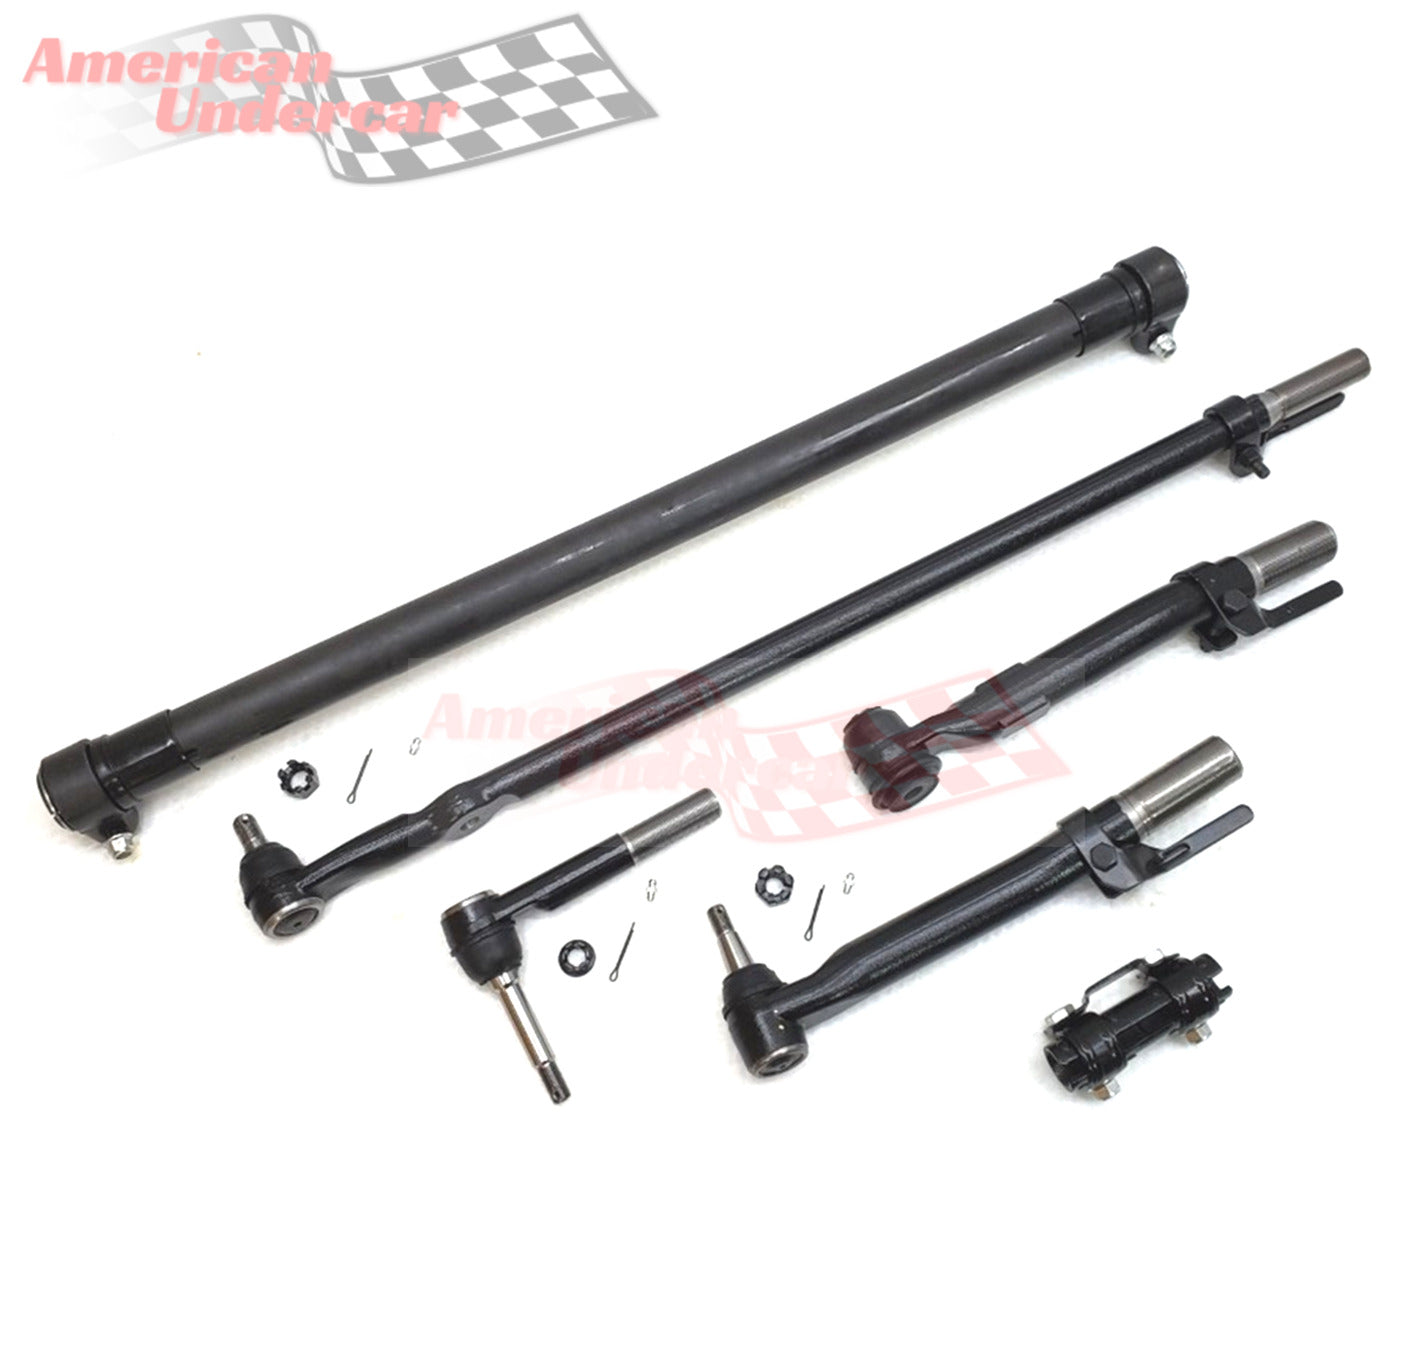 XRF Ford F550 Super Duty Steering and Suspension Kit 2005 - 2010 4x4